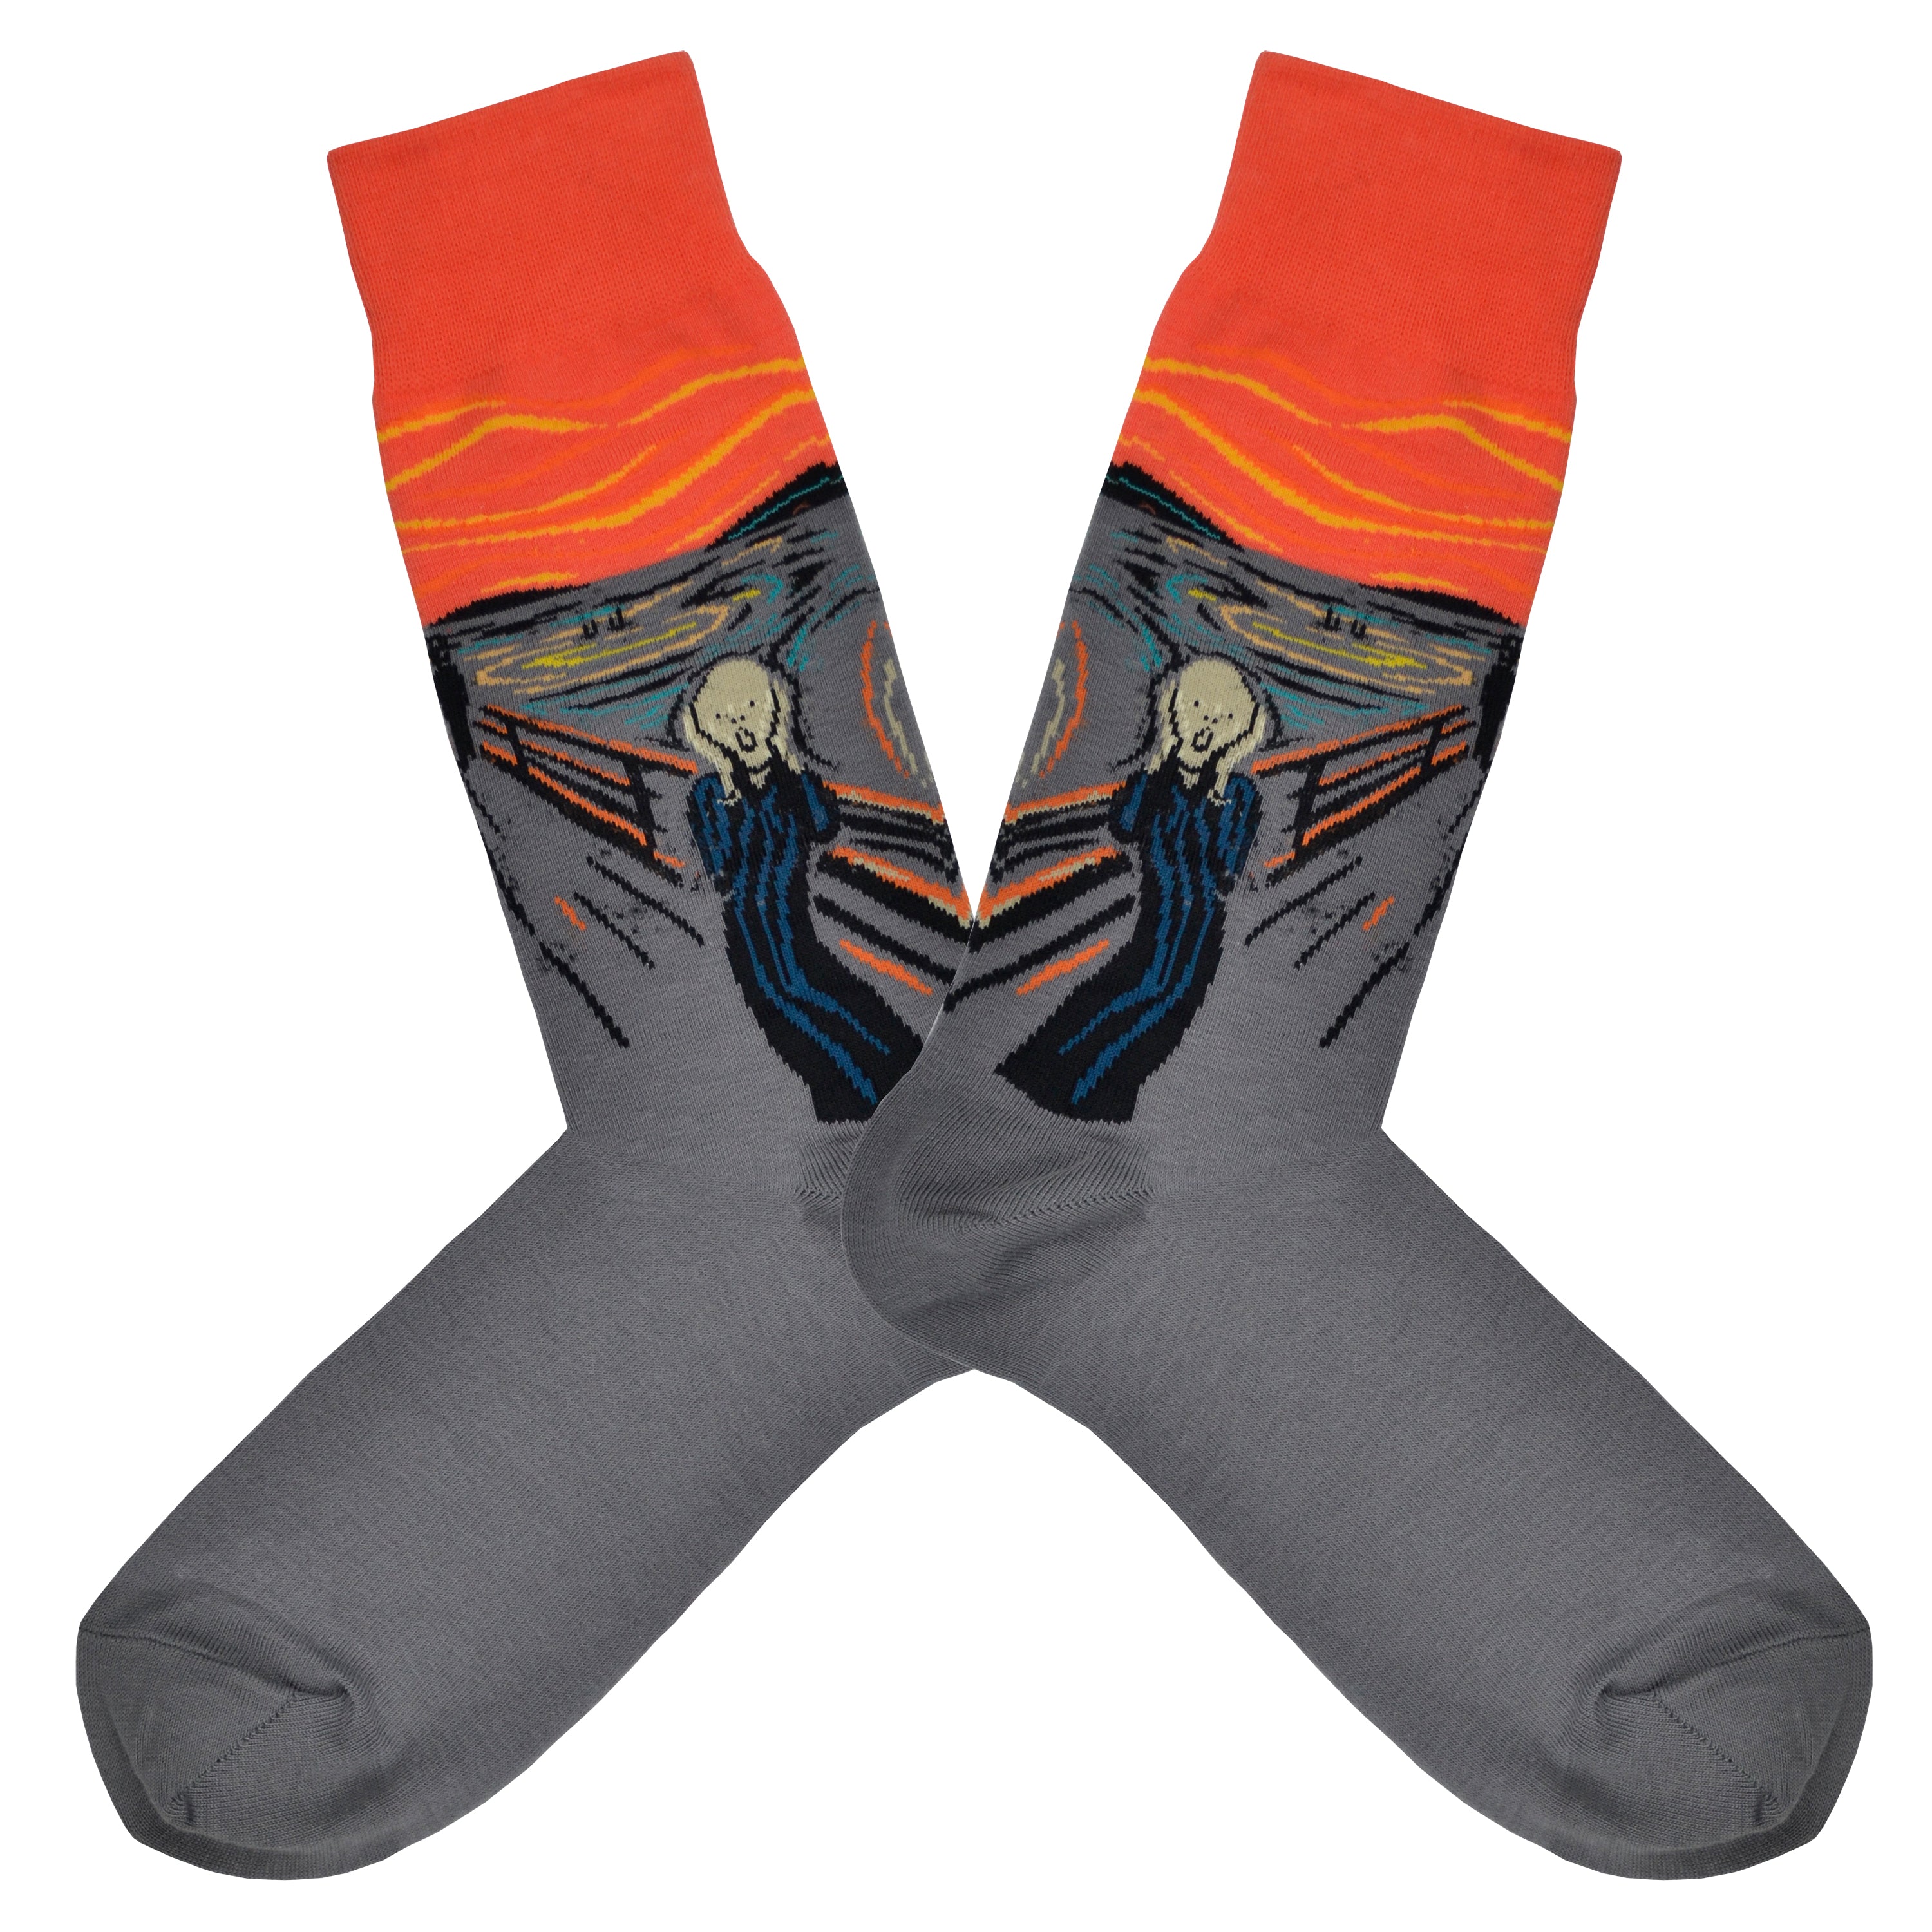 Shown in a flatlay, a pair of Hot Sox cotton men’s crew socks with orange background and the artist Edvard Munch’s abstract painting of a screaming figure on a bridge